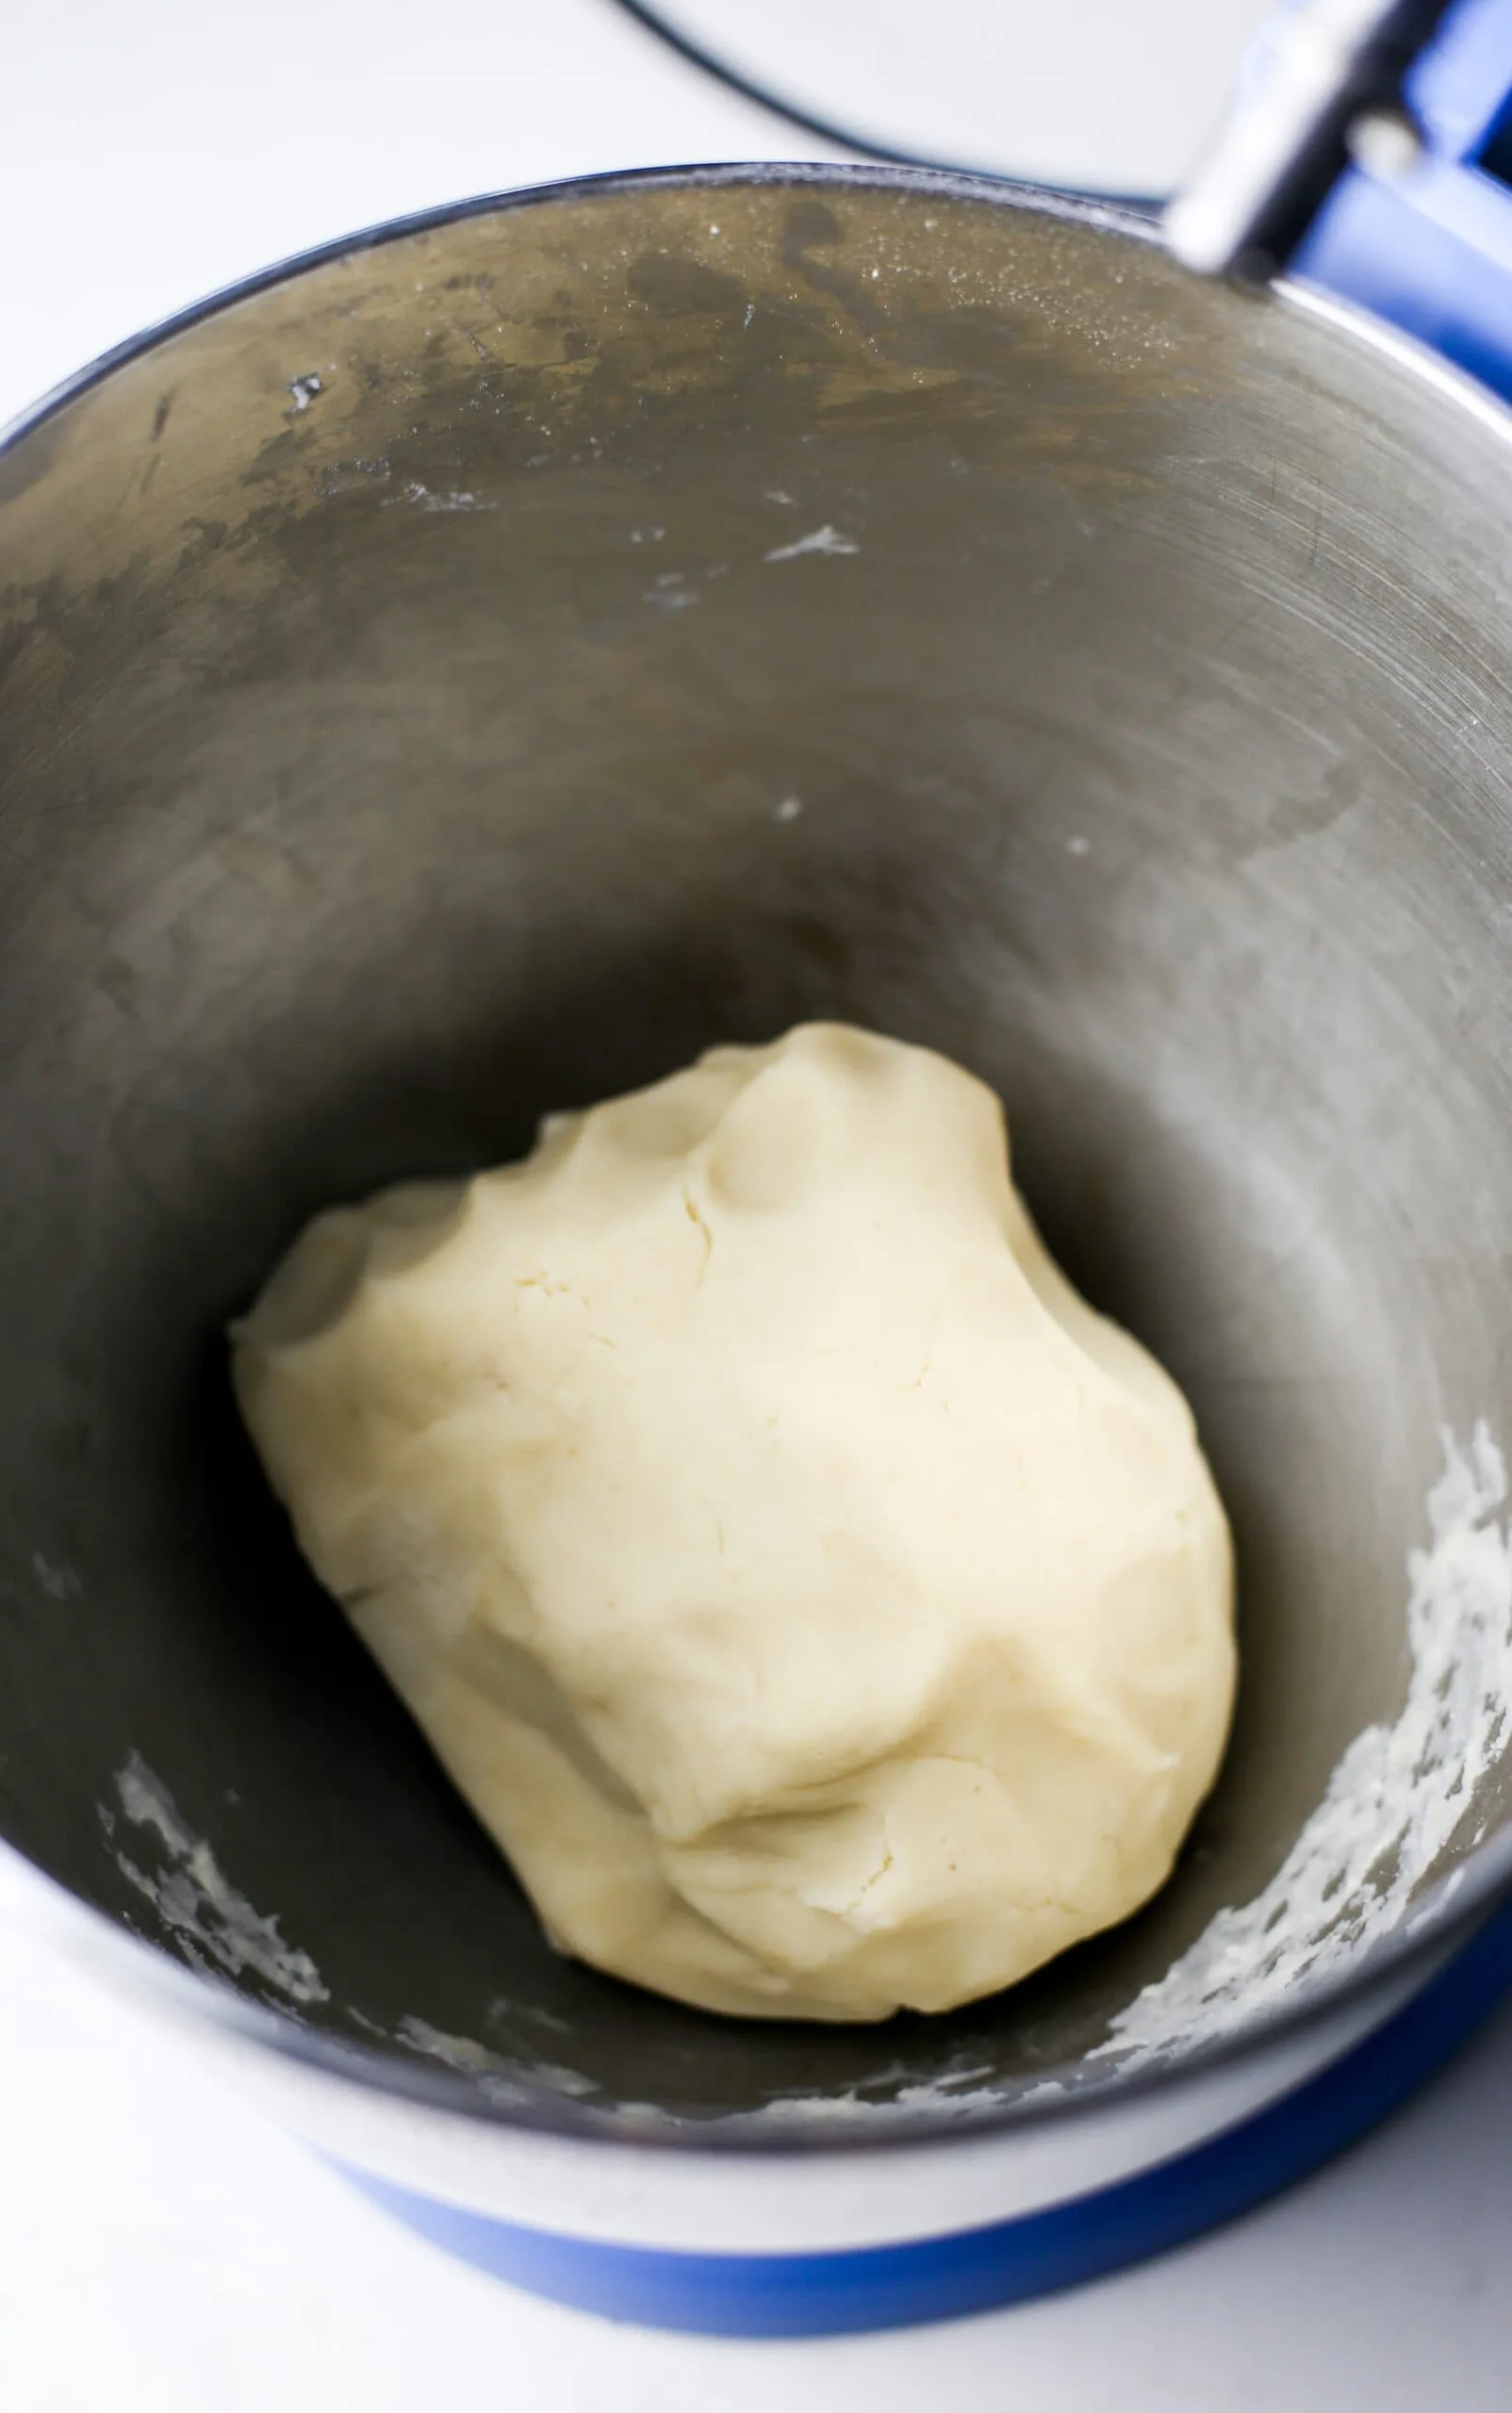 Smooth and round condensed milk cookie dough ball in a mixing bowl.